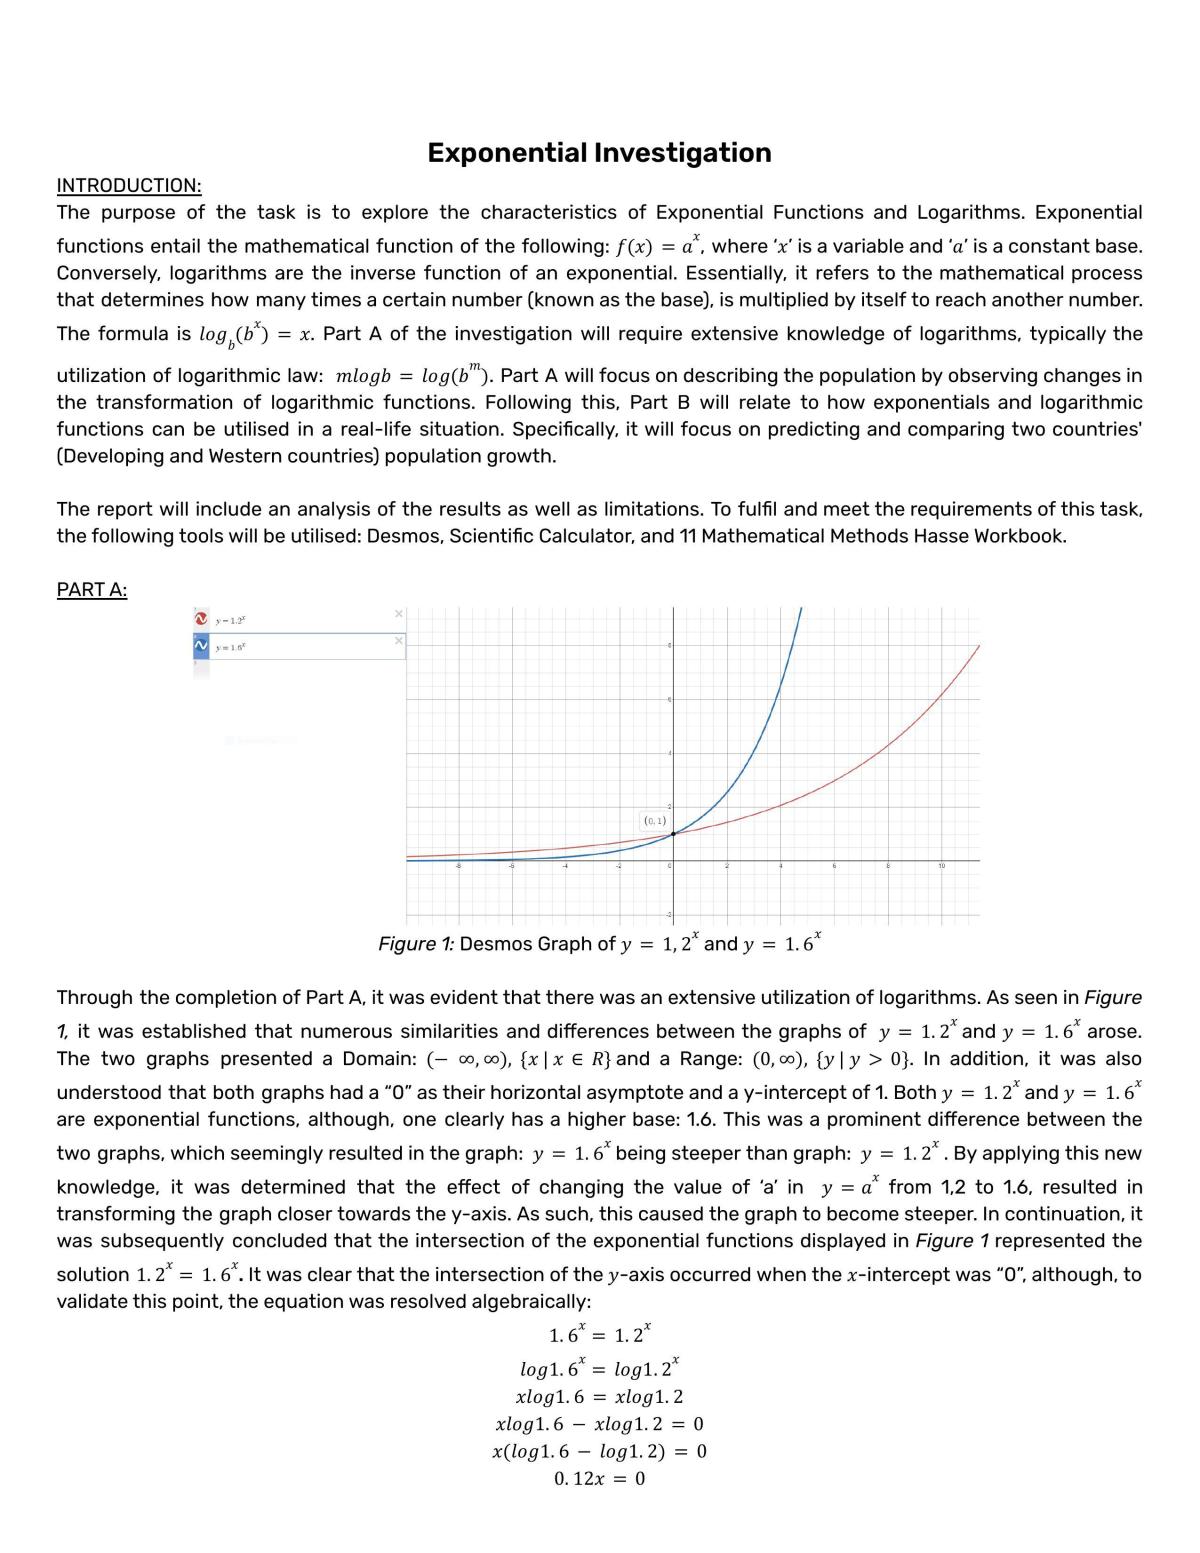 Stage 1 Exponential Investigation - Page 1